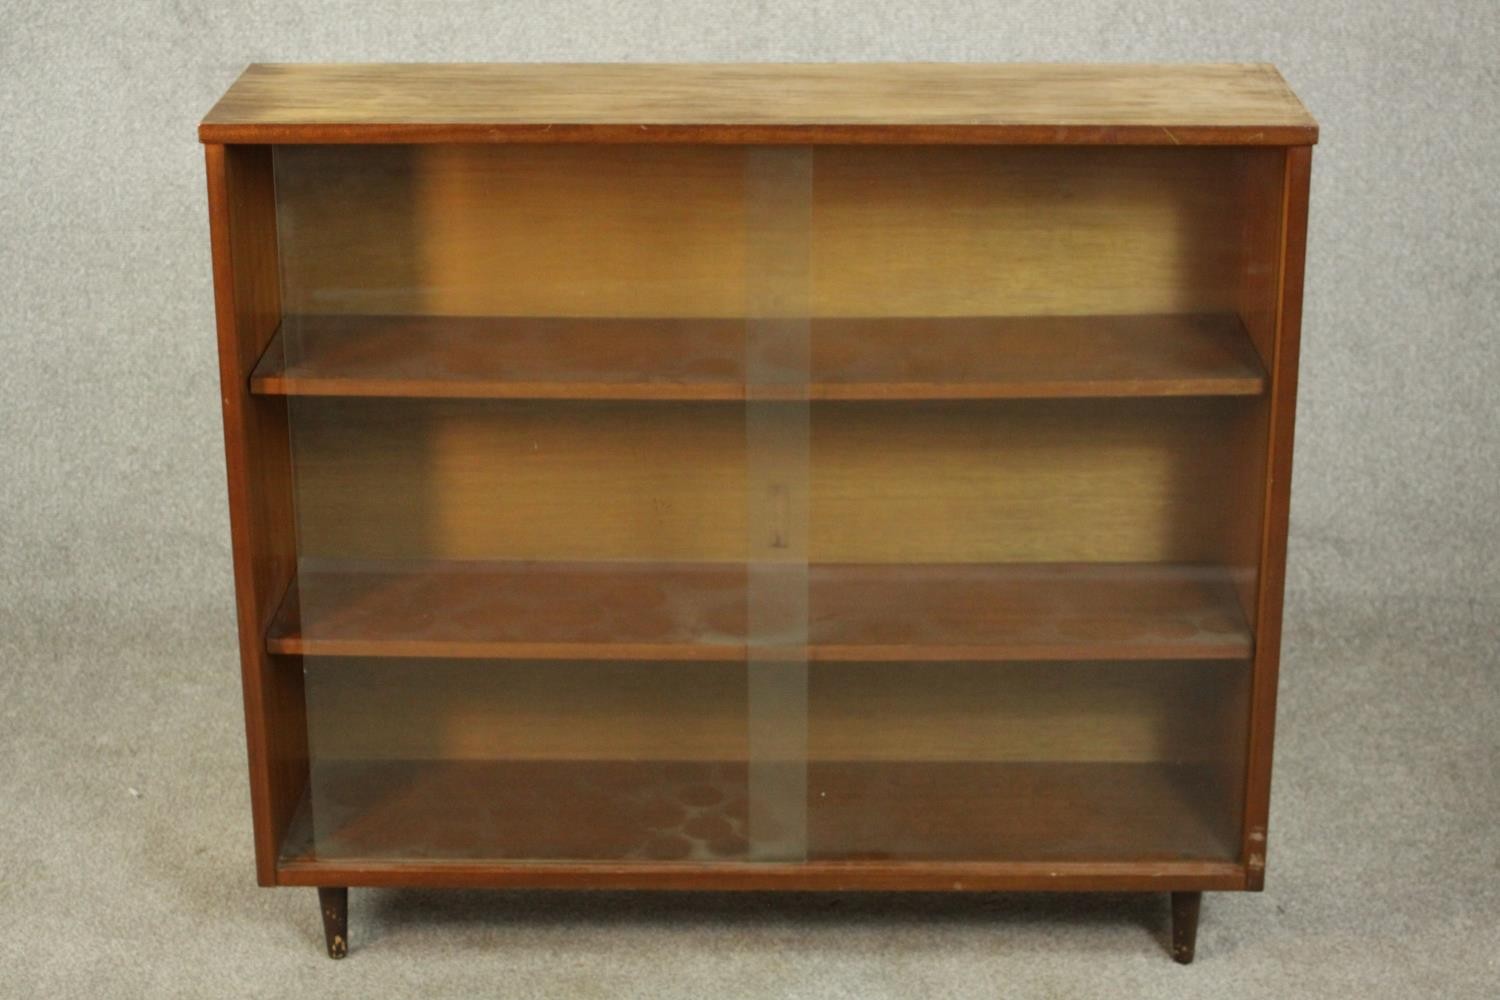 A circa 1960s Jonell bookcase, with a pair of glass sliding doors enclosing shelves, on tapering